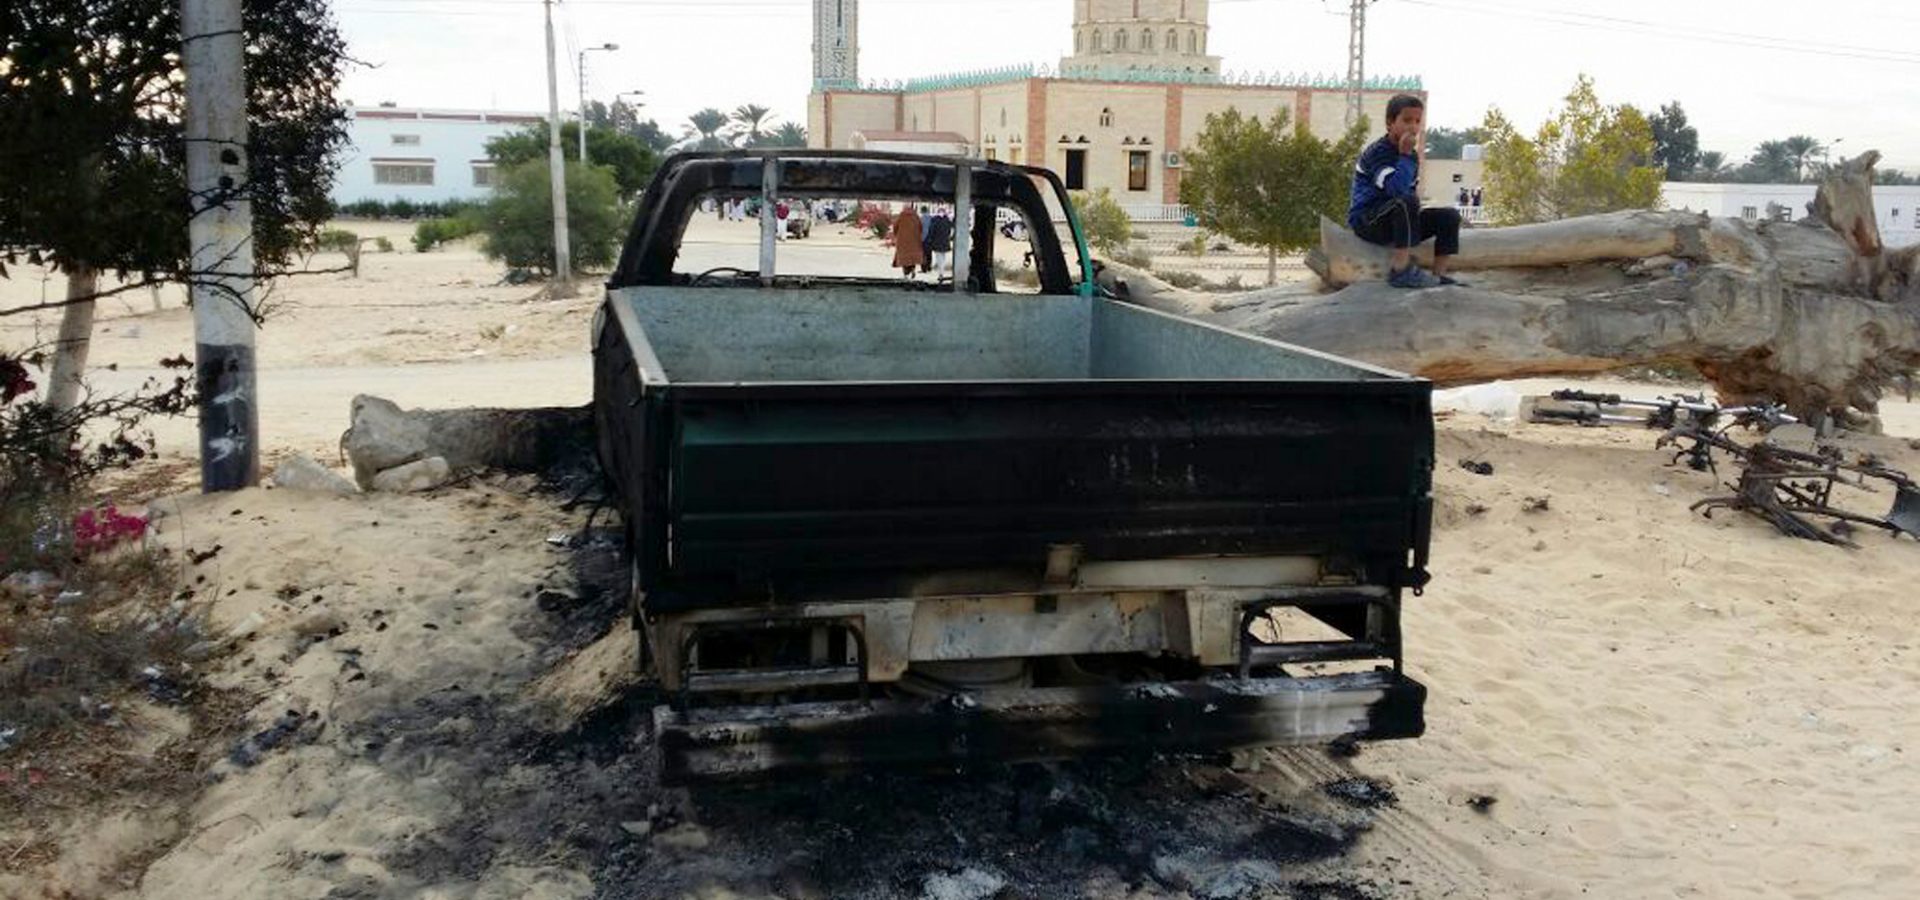 A burned truck is seen outside Al-Rawda Mosque in Bir al-Abd northern Sinai, Egypt a day after attackers killed hundreds of worshippers, on Saturday, Nov. 25, 2017. Friday's assault was Egypt's deadliest attack in the country's modern history, a grim milestone in a long-running fight against an insurgency. (AP/Tarek Samy)